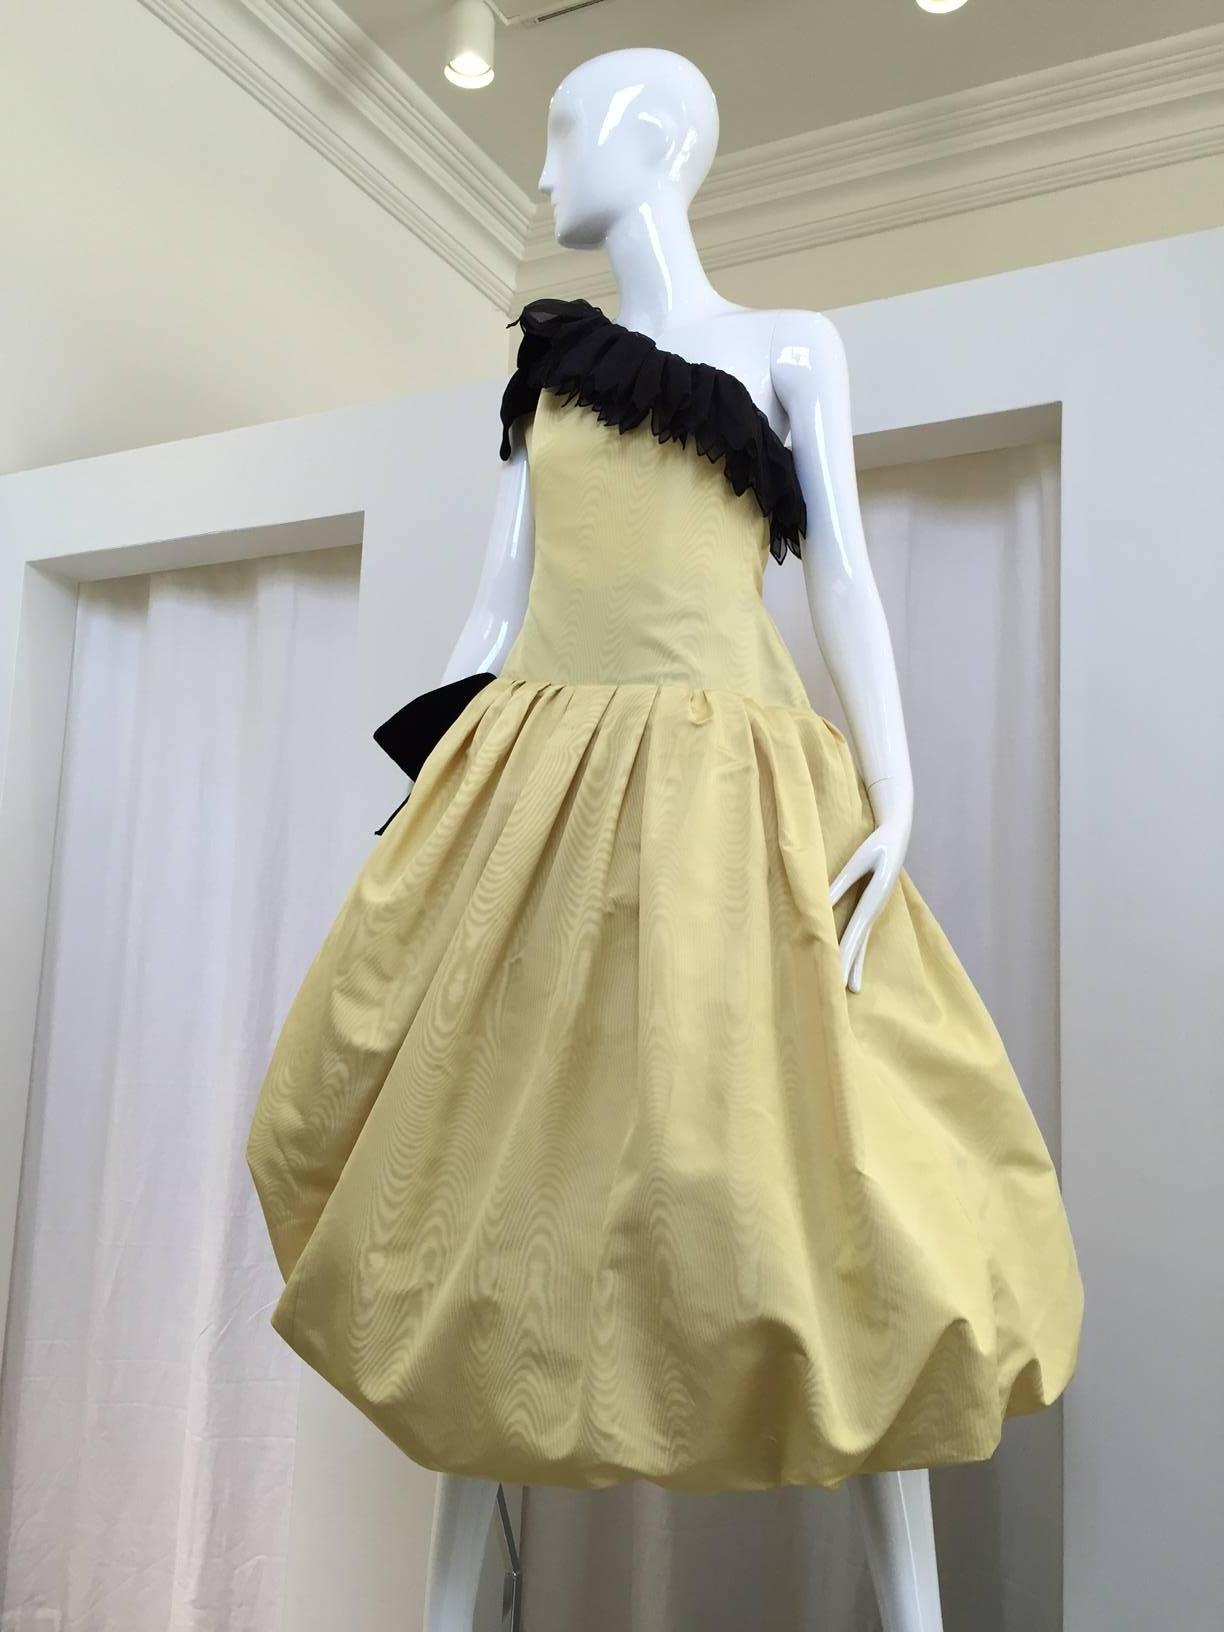 Women's Christian Dior by Marc Bohan Haute Couture 1982 
Yellow Silk Cocktail Dress